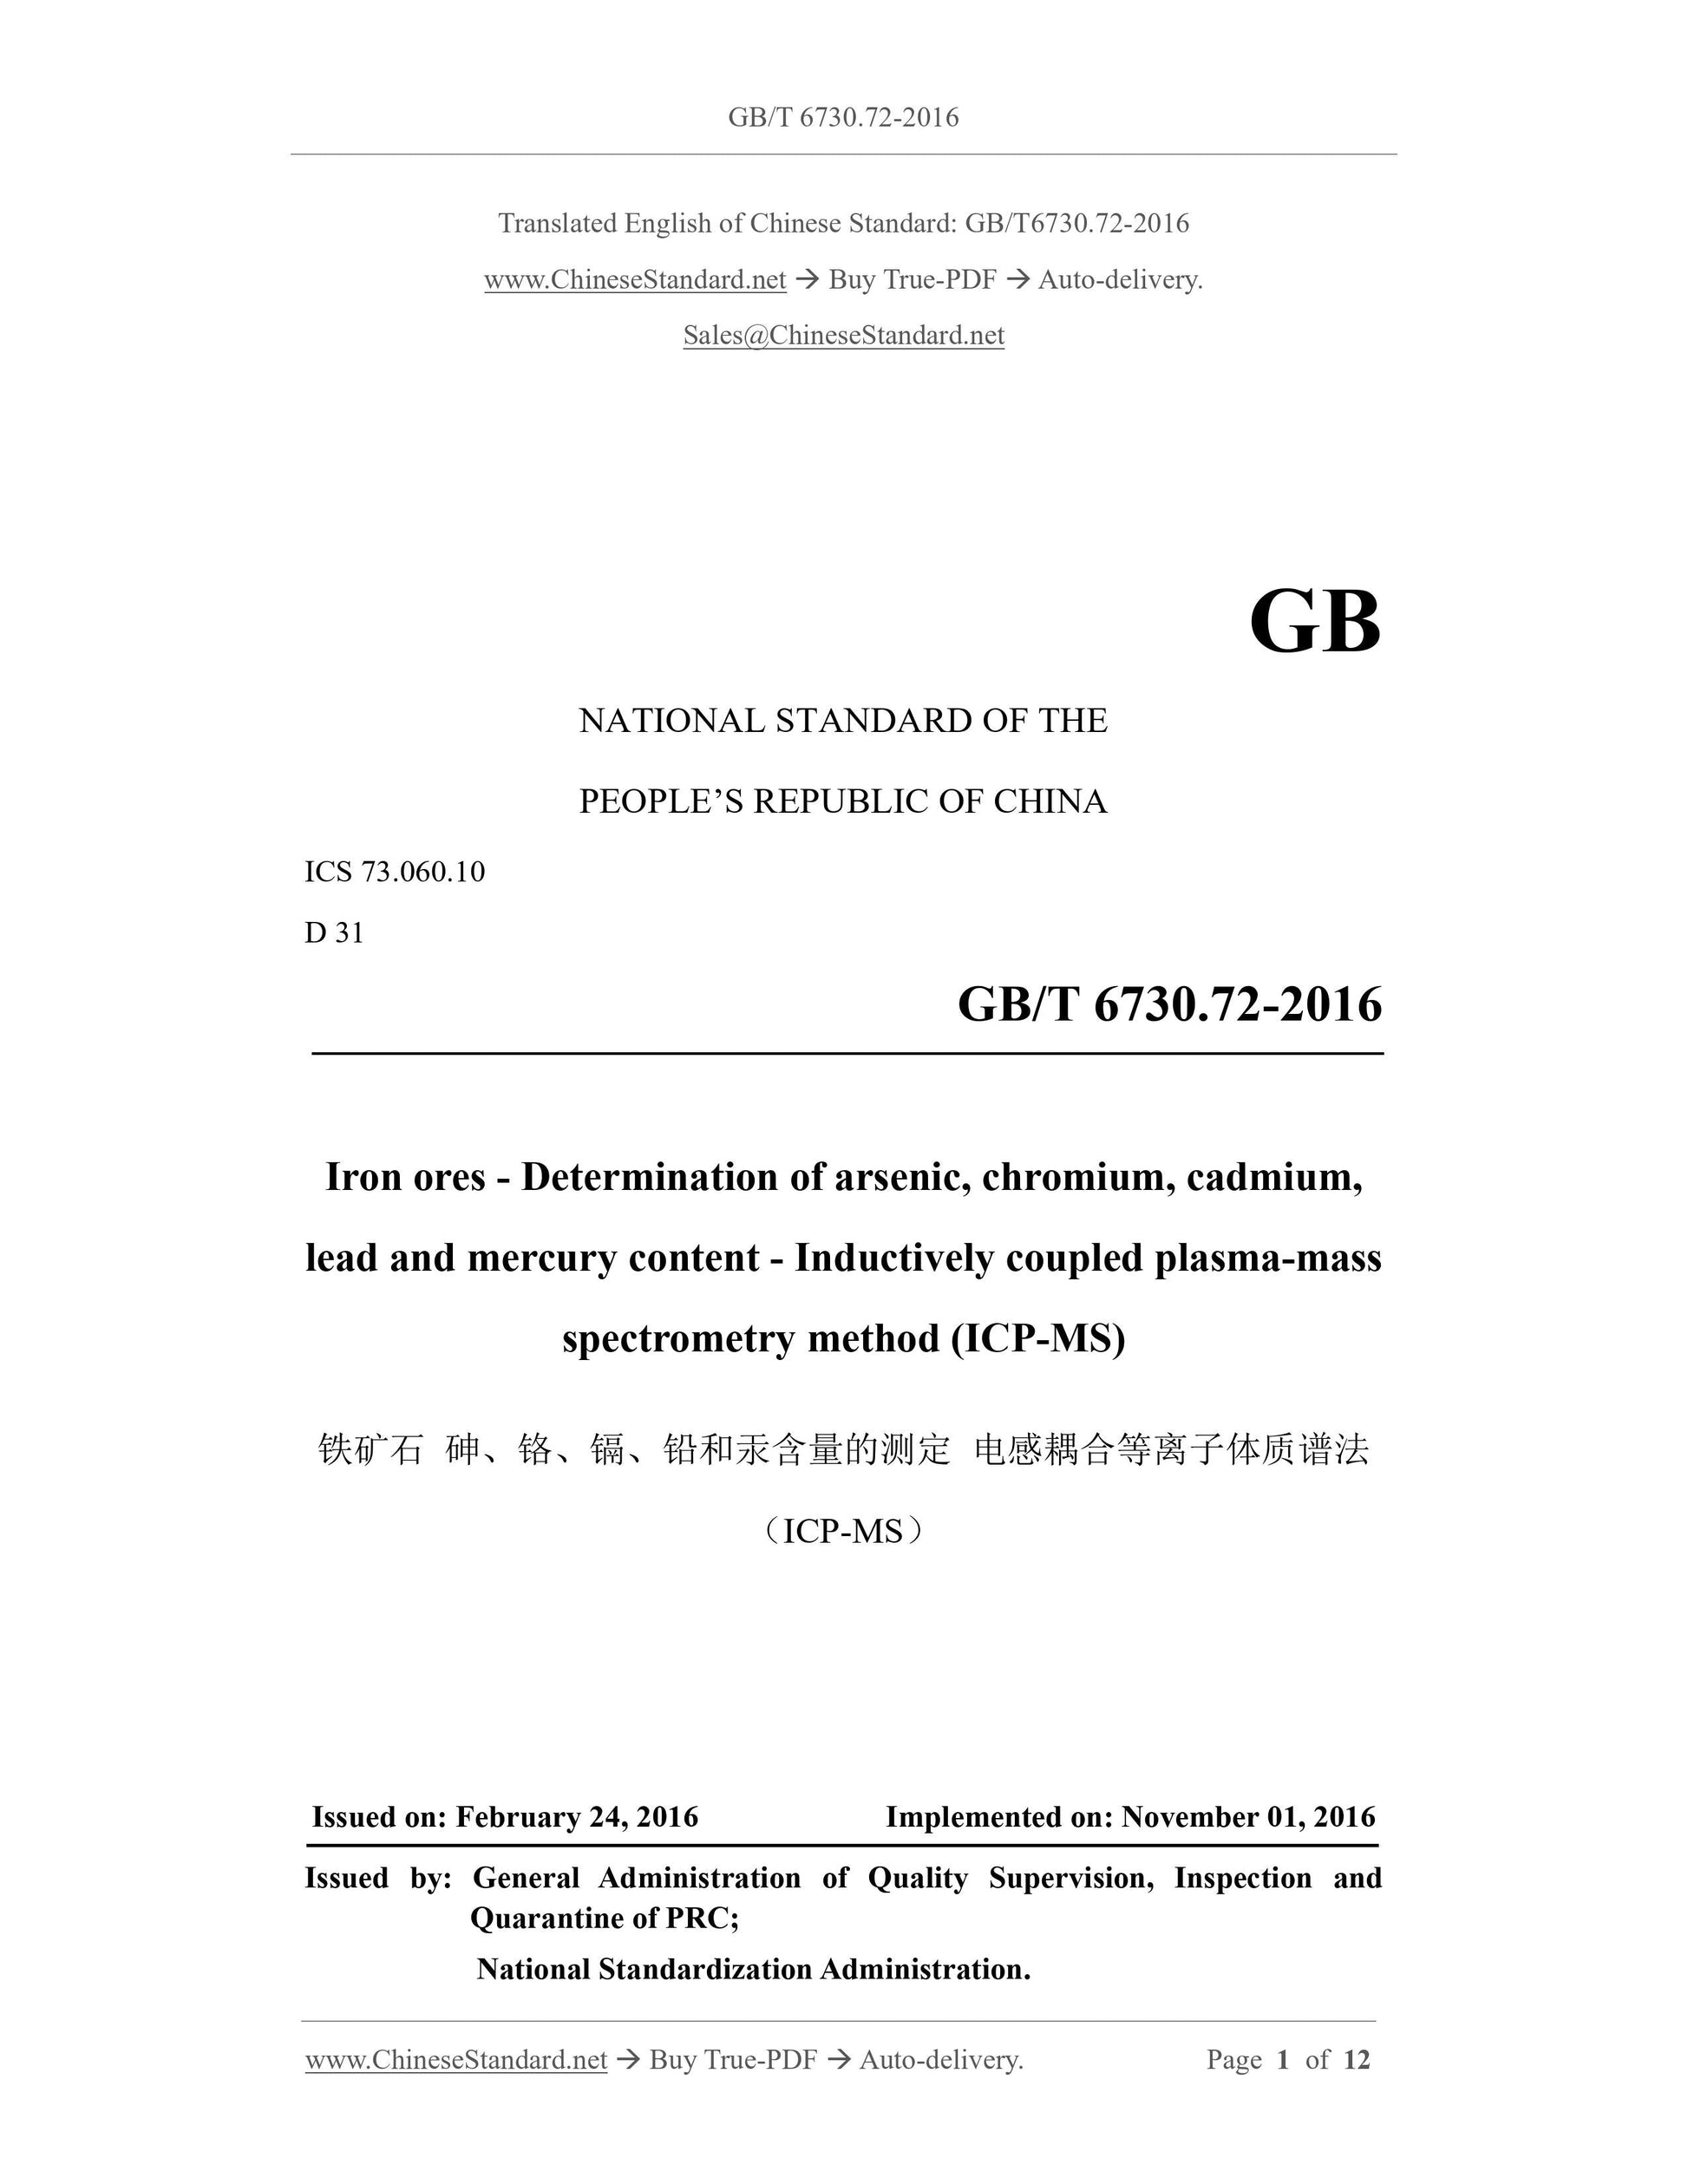 GB/T 6730.72-2016 Page 1